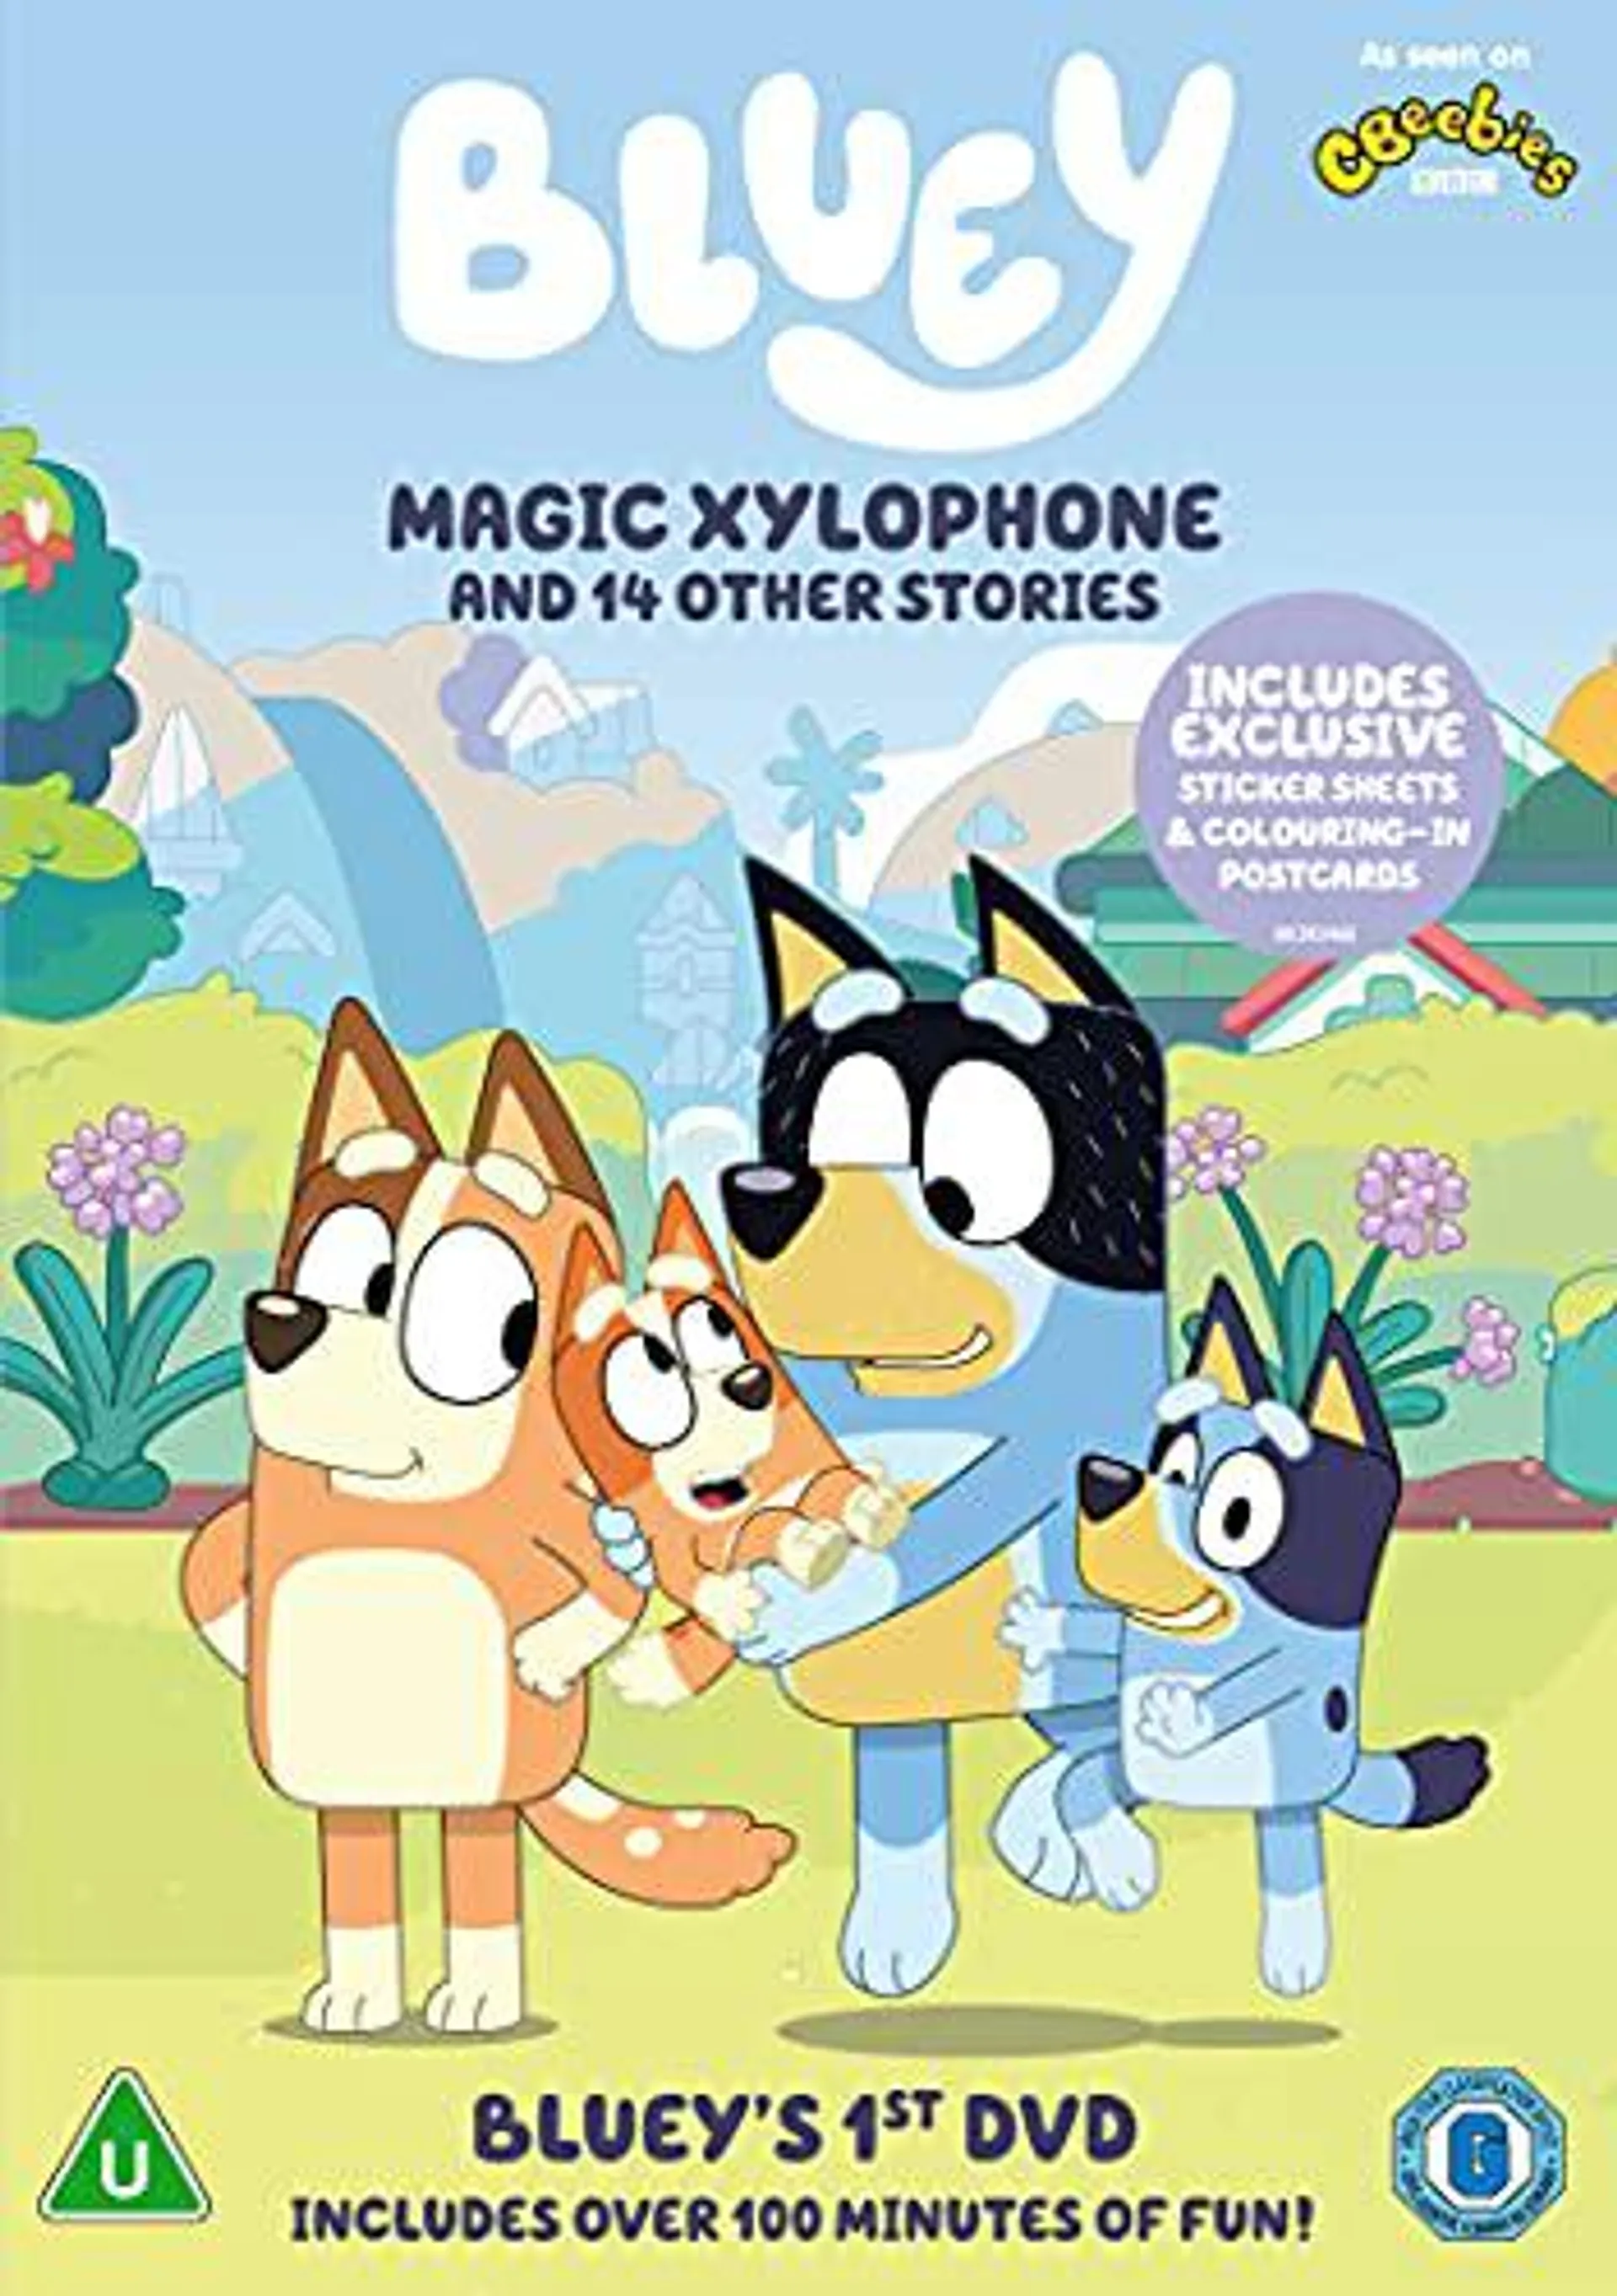 Bluey - Magic Xylophone and Other Stories (includes exclusive stickers and postcards)